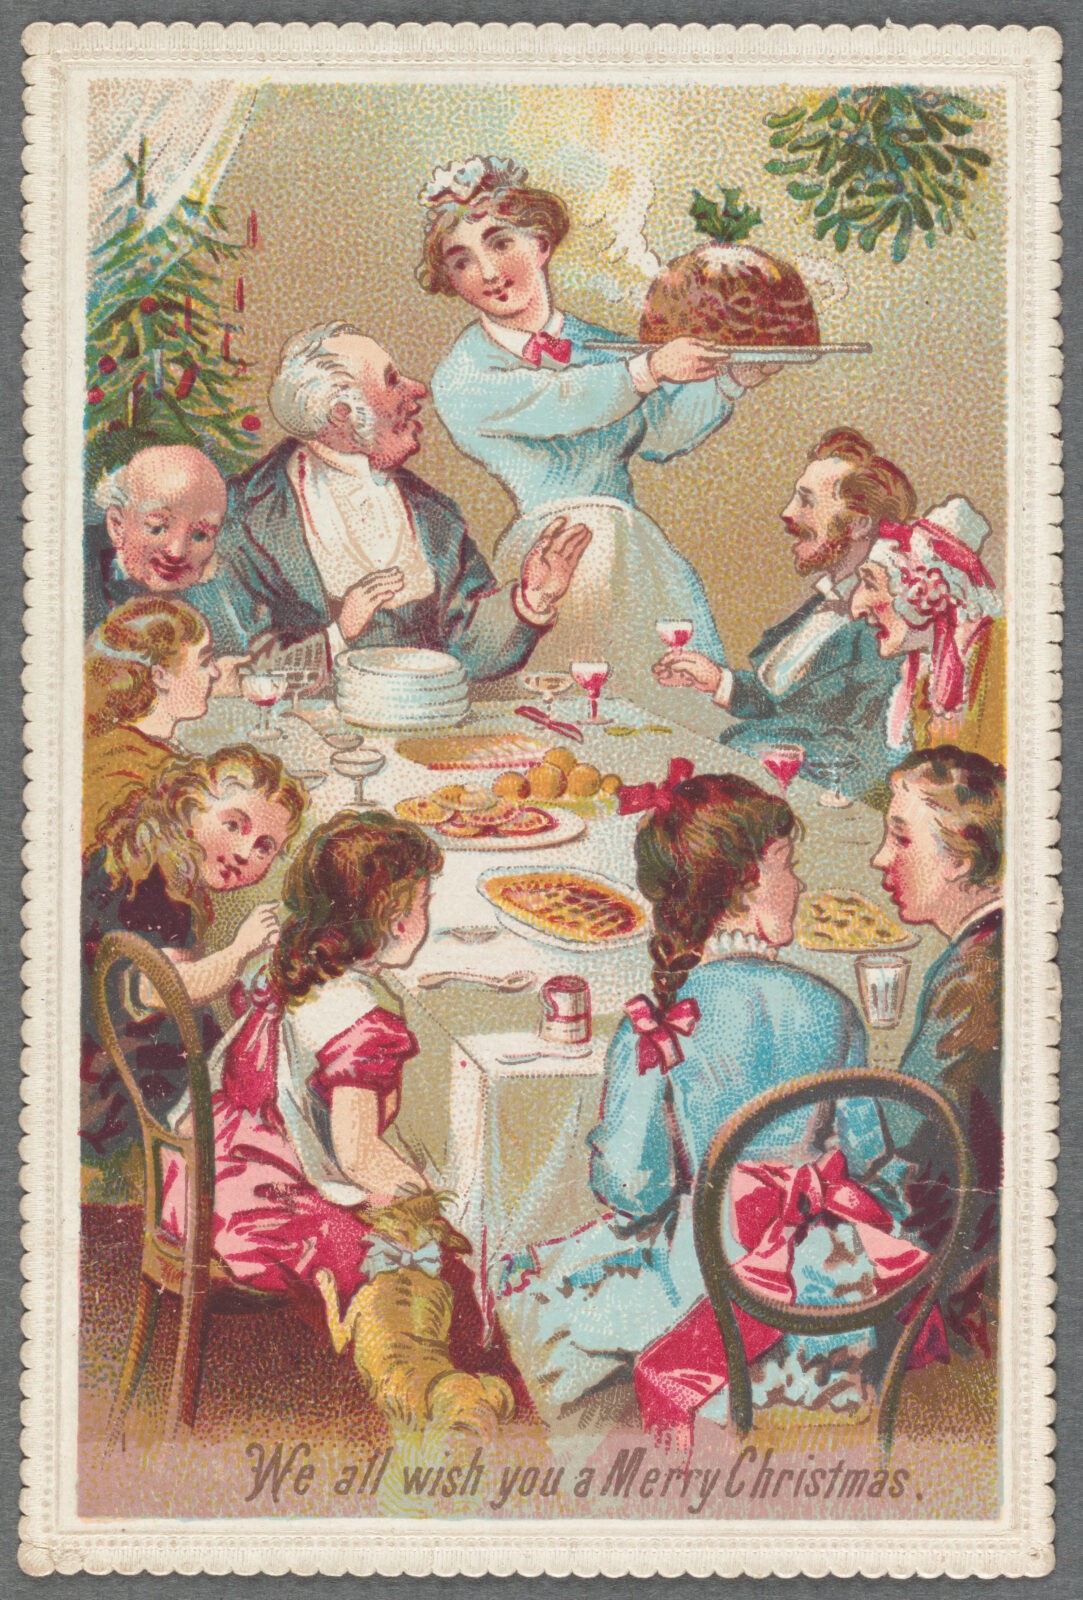 NYPL, We all wish you a merry Christmas, illustration